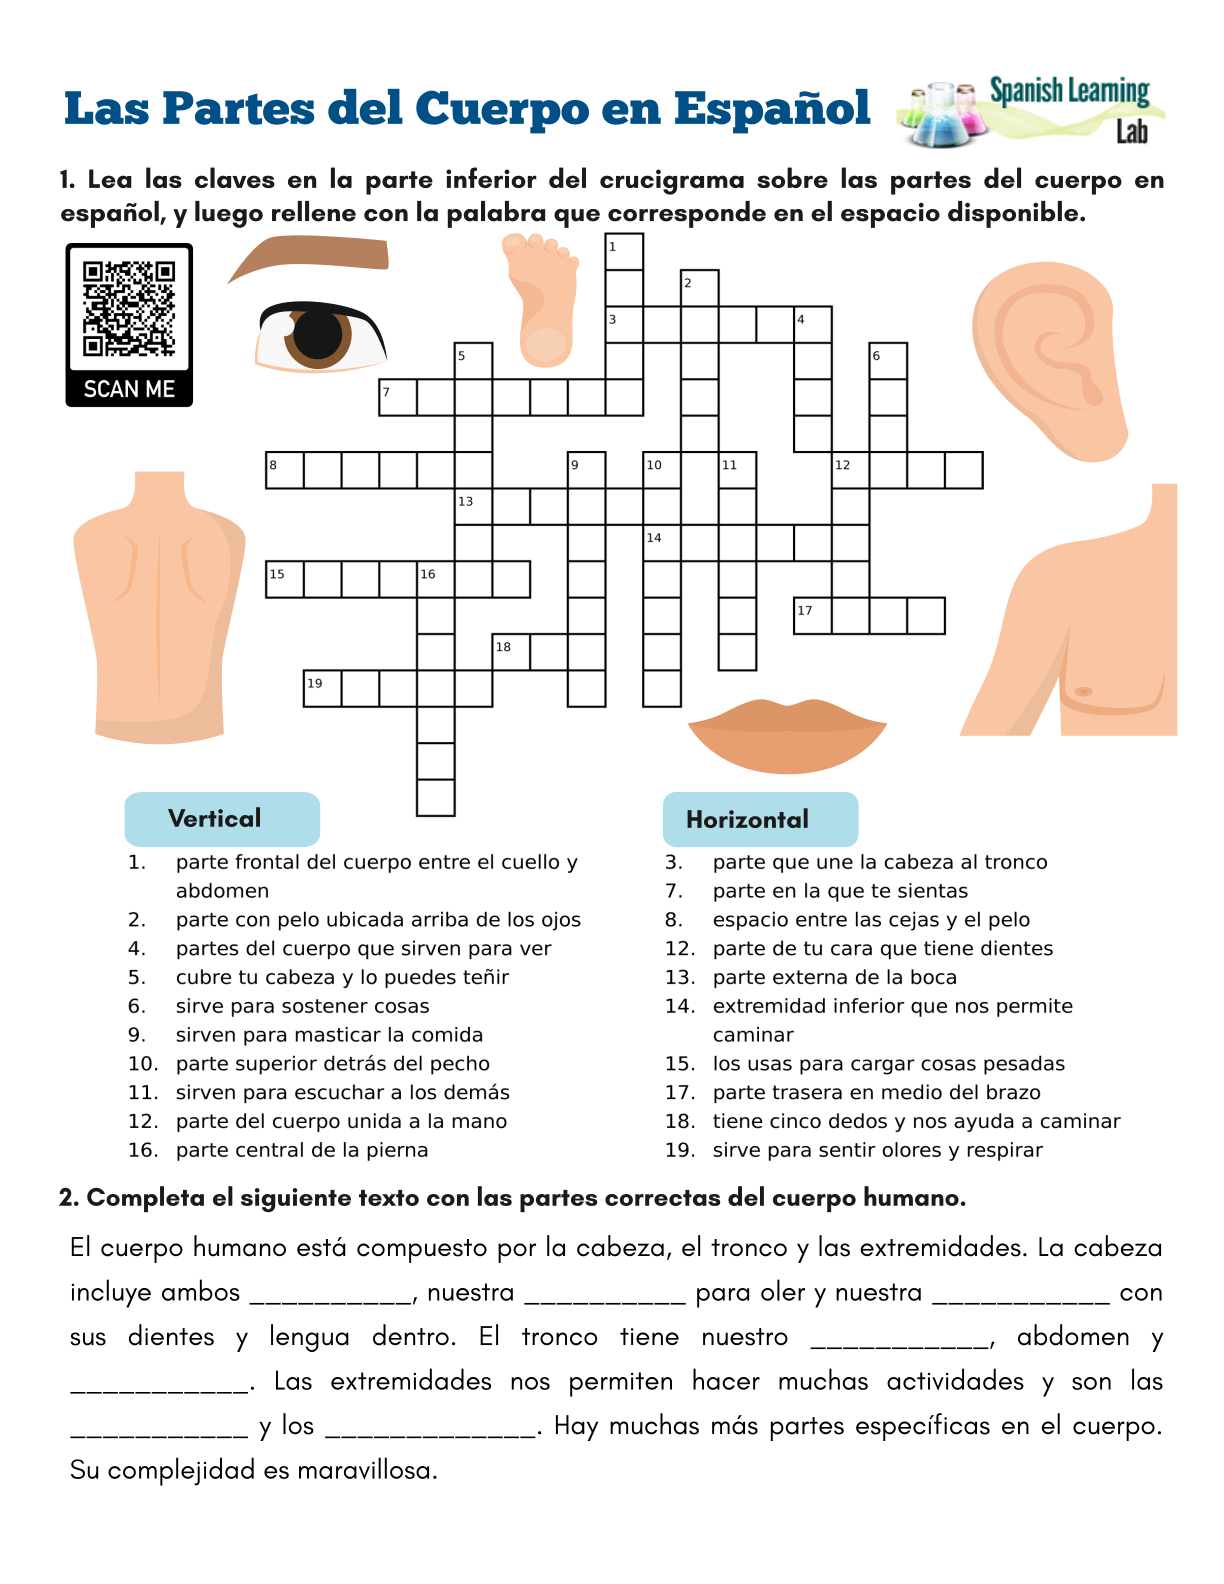 Parts of the Body in Spanish - PDF Crossword Puzzle Throughout Body Parts In Spanish Worksheet